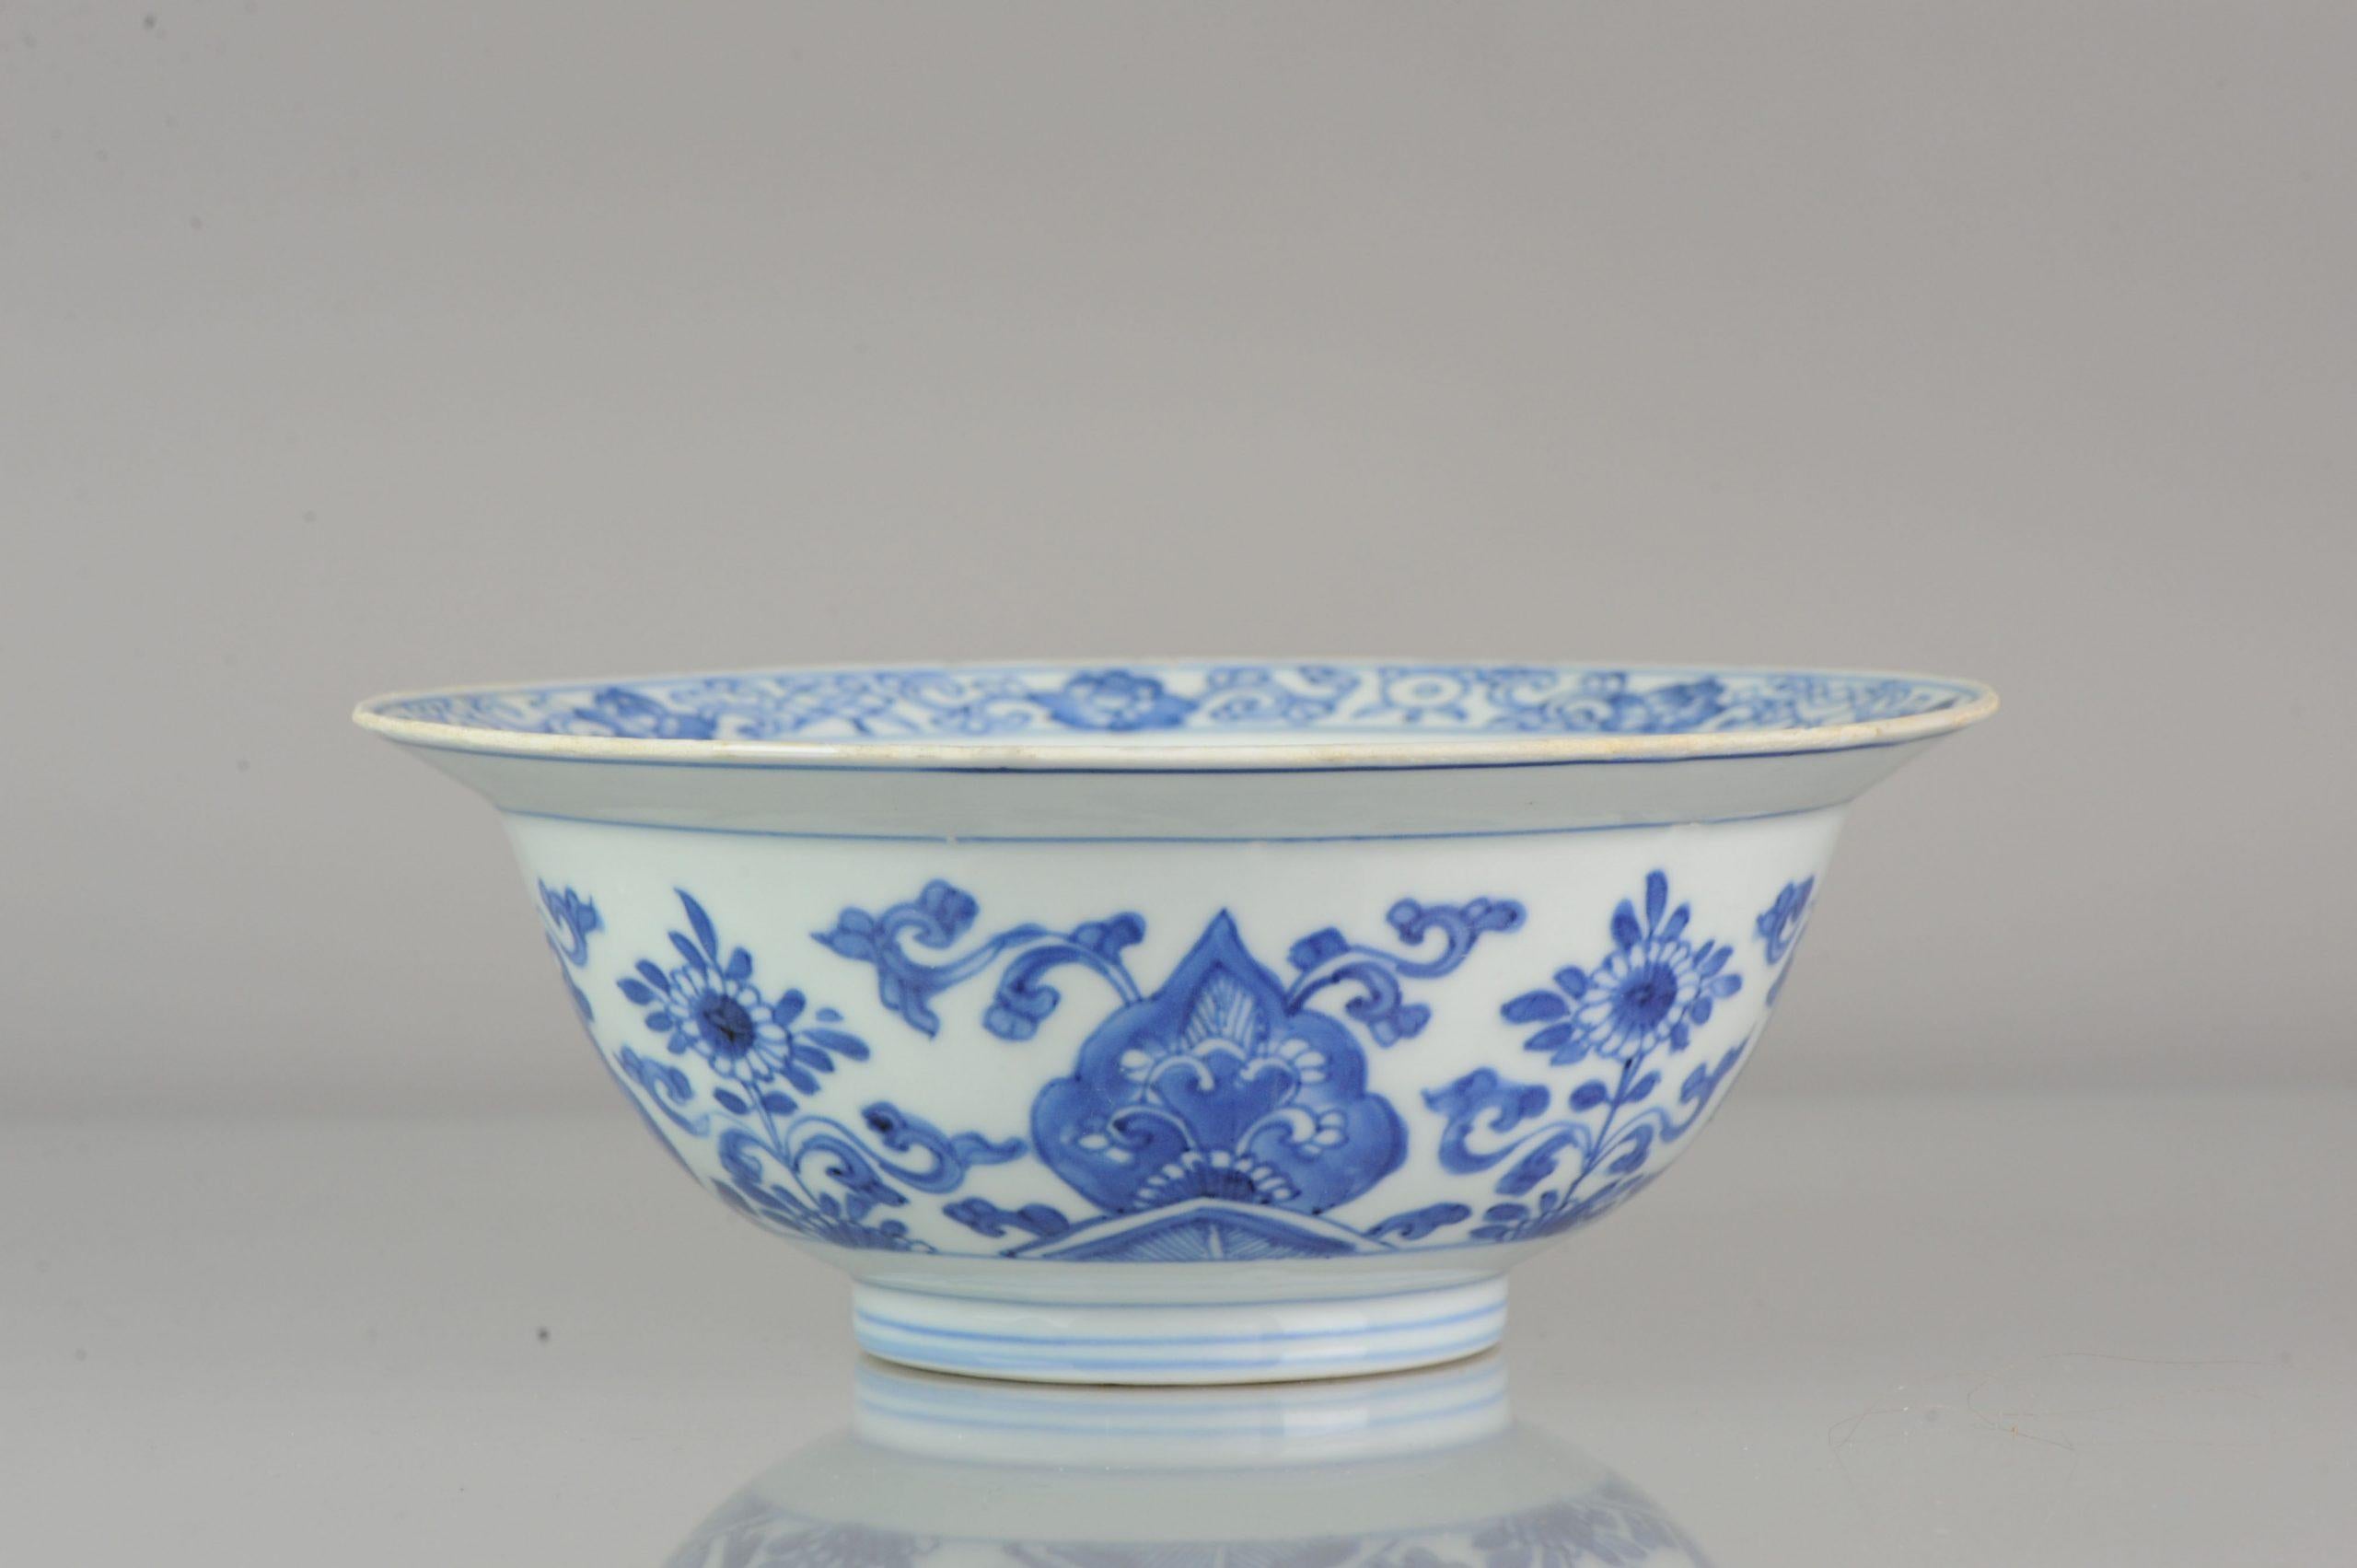 Now this is piece. Very nice example of a bowl

Based on the Kraak klapmuts bowls as shown in 